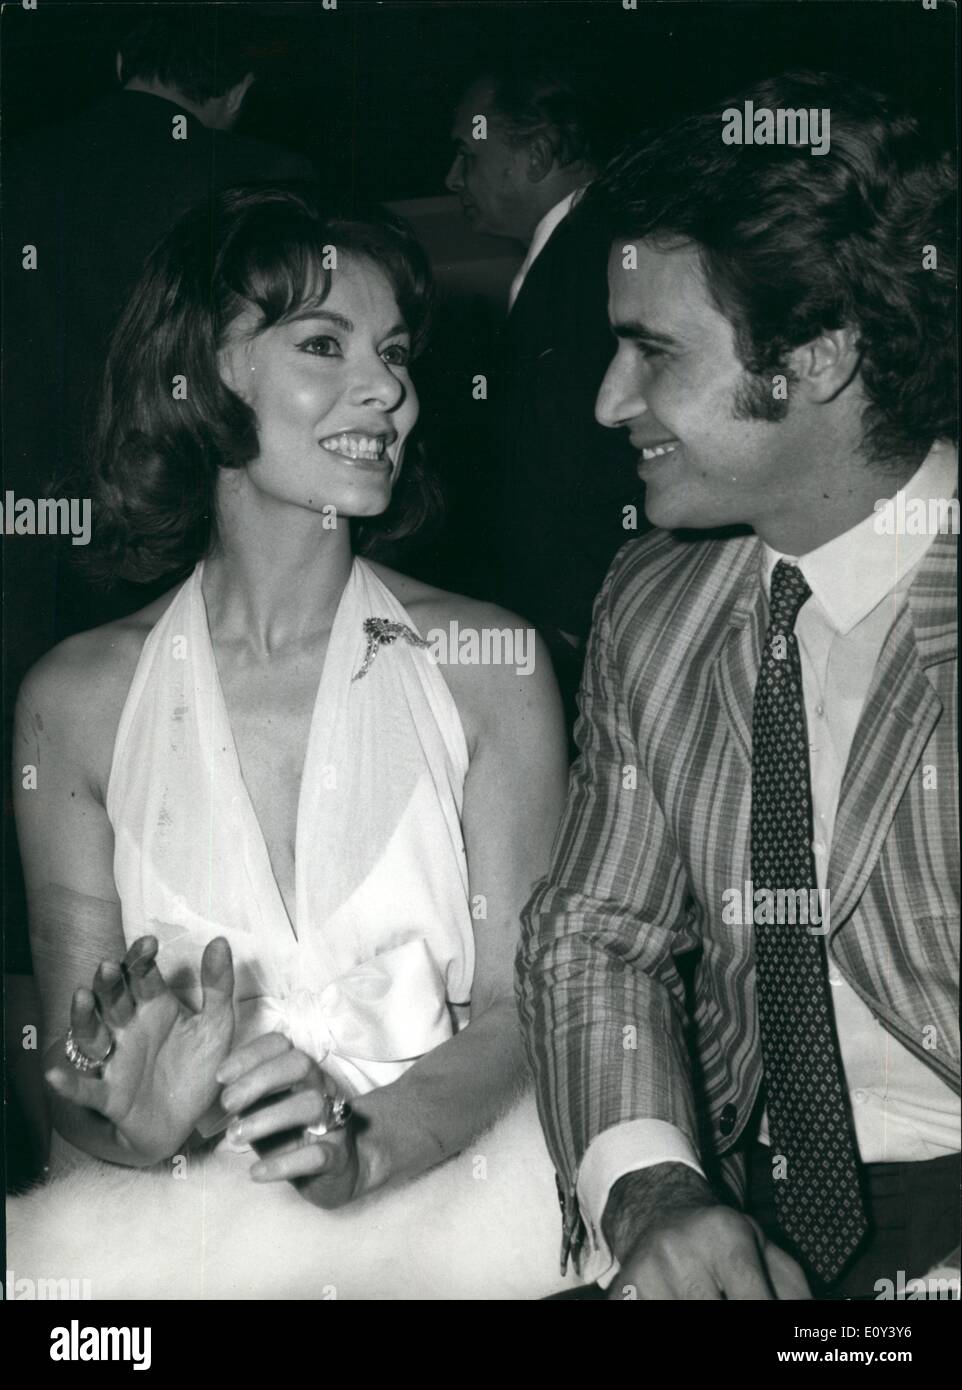 Oct. 10, 1968 - Beautiful British actress Anne Heywood, is in Rome to turn the film The Nun of Monza, as principal star in the film drawn by the novels of Alessandro Manzoni and DH Lawrence that count the story of a young nun who meets the love and she realized she was mistaking the vocation. For this love and for the consequences she was immured alive. The story happened on the Middle ages. Photo shows Beautiful Anne Heywood and the Italian actor Antonio Sabato, who plays the role of the young lover of the nun. Stock Photo